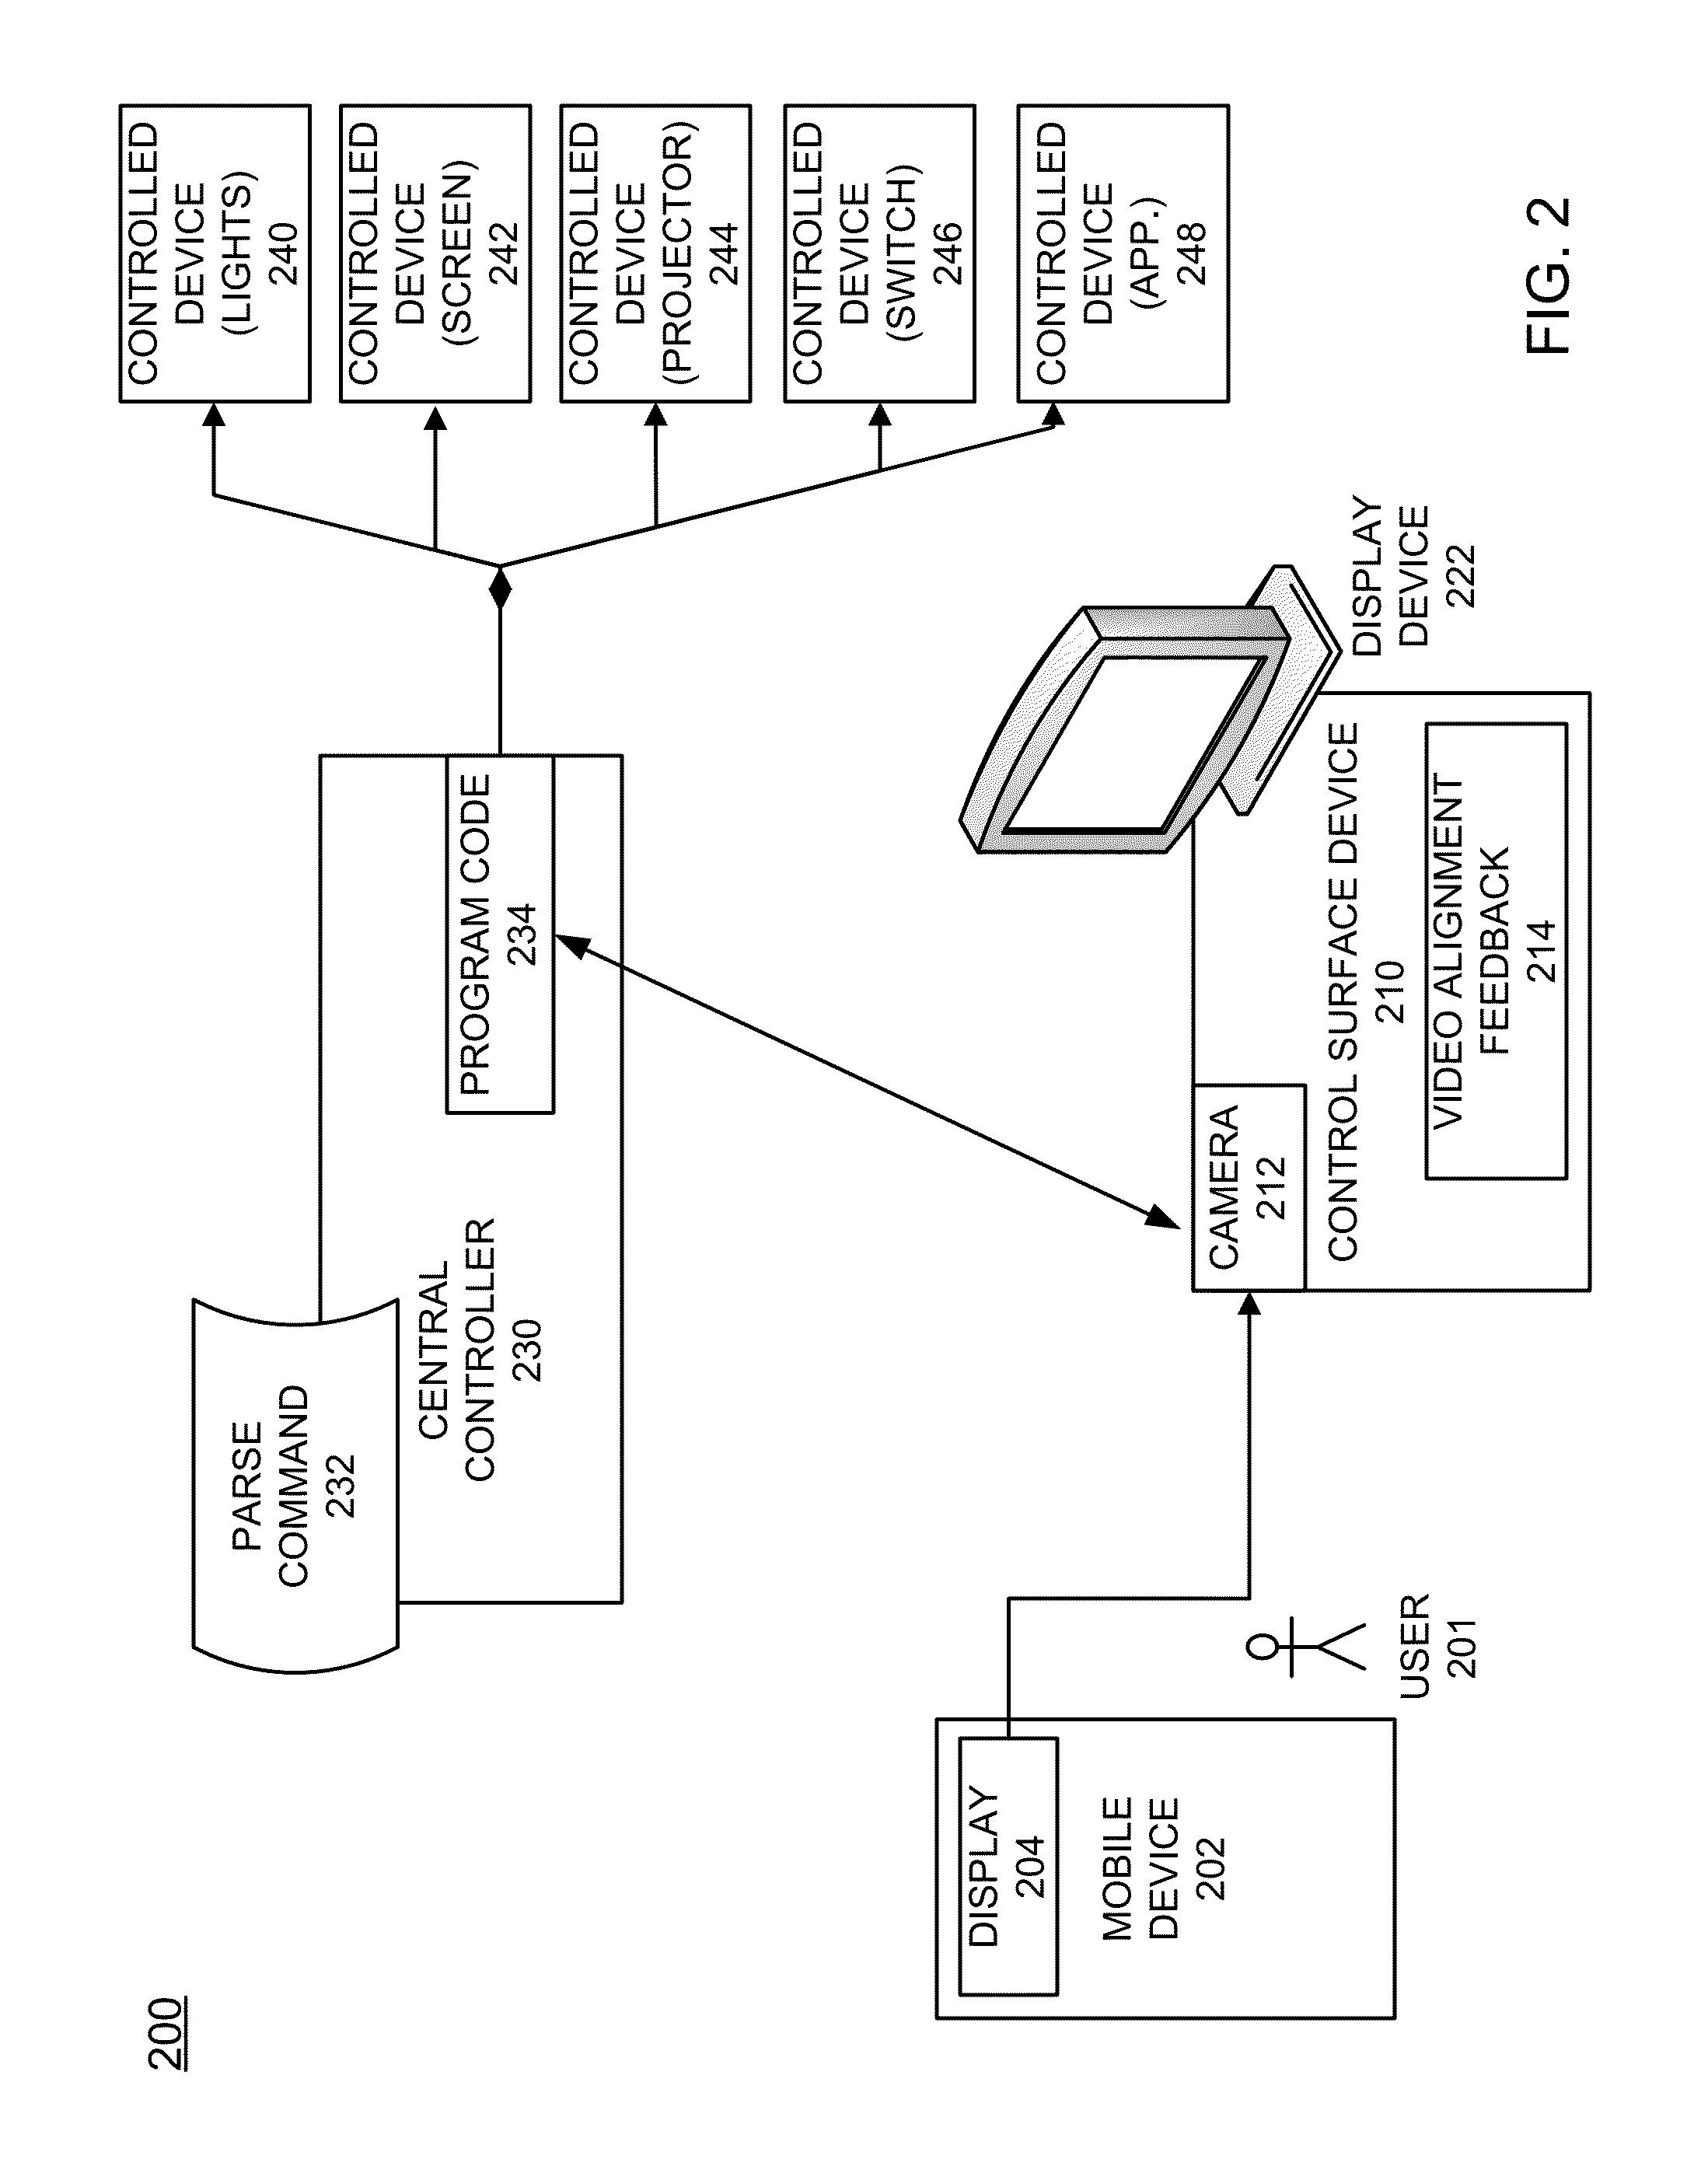 Method and apparatus of processing symbology interactions between mobile stations and a control system